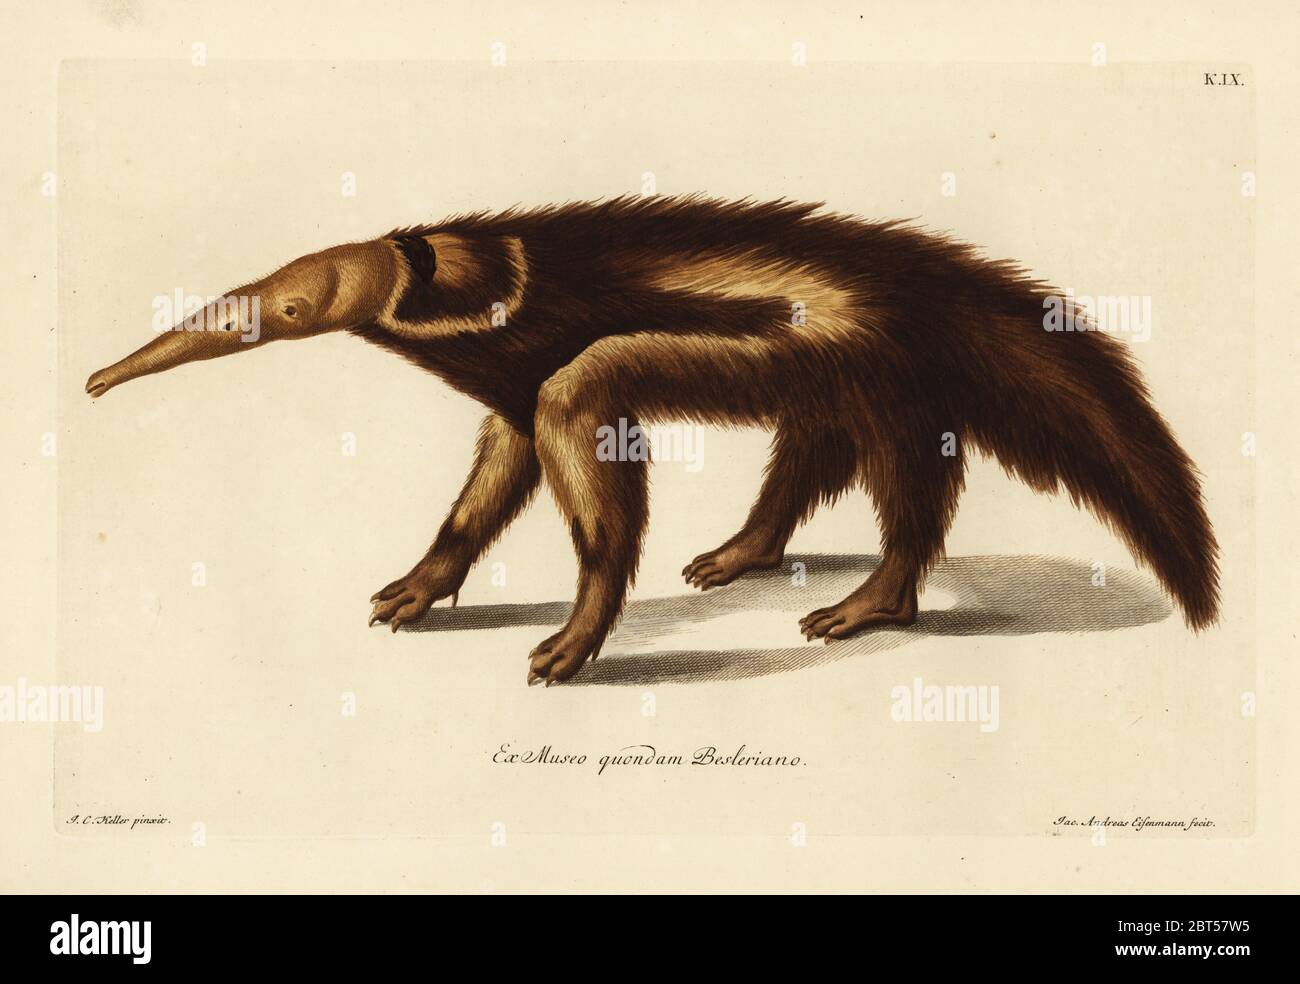 Giant anteater or ant bear, Myrmecophaga tridactyla (Le chasseur de fourmis, Tamadua guacu). Handcoloured copperplate engraving by Jakob-Andreas Eisemann after an illustration by Johann Christoph Keller from Georg Wolfgang Knorr's Deliciae Naturae Selectae of Kabinet van Zeldzaamheden der Natuur, Blusse and Son, Nuremberg, 1771. Specimen from a Wunderkammer or Cabinet of Curiosities of Basilius Besler and Michael Besler. Stock Photo